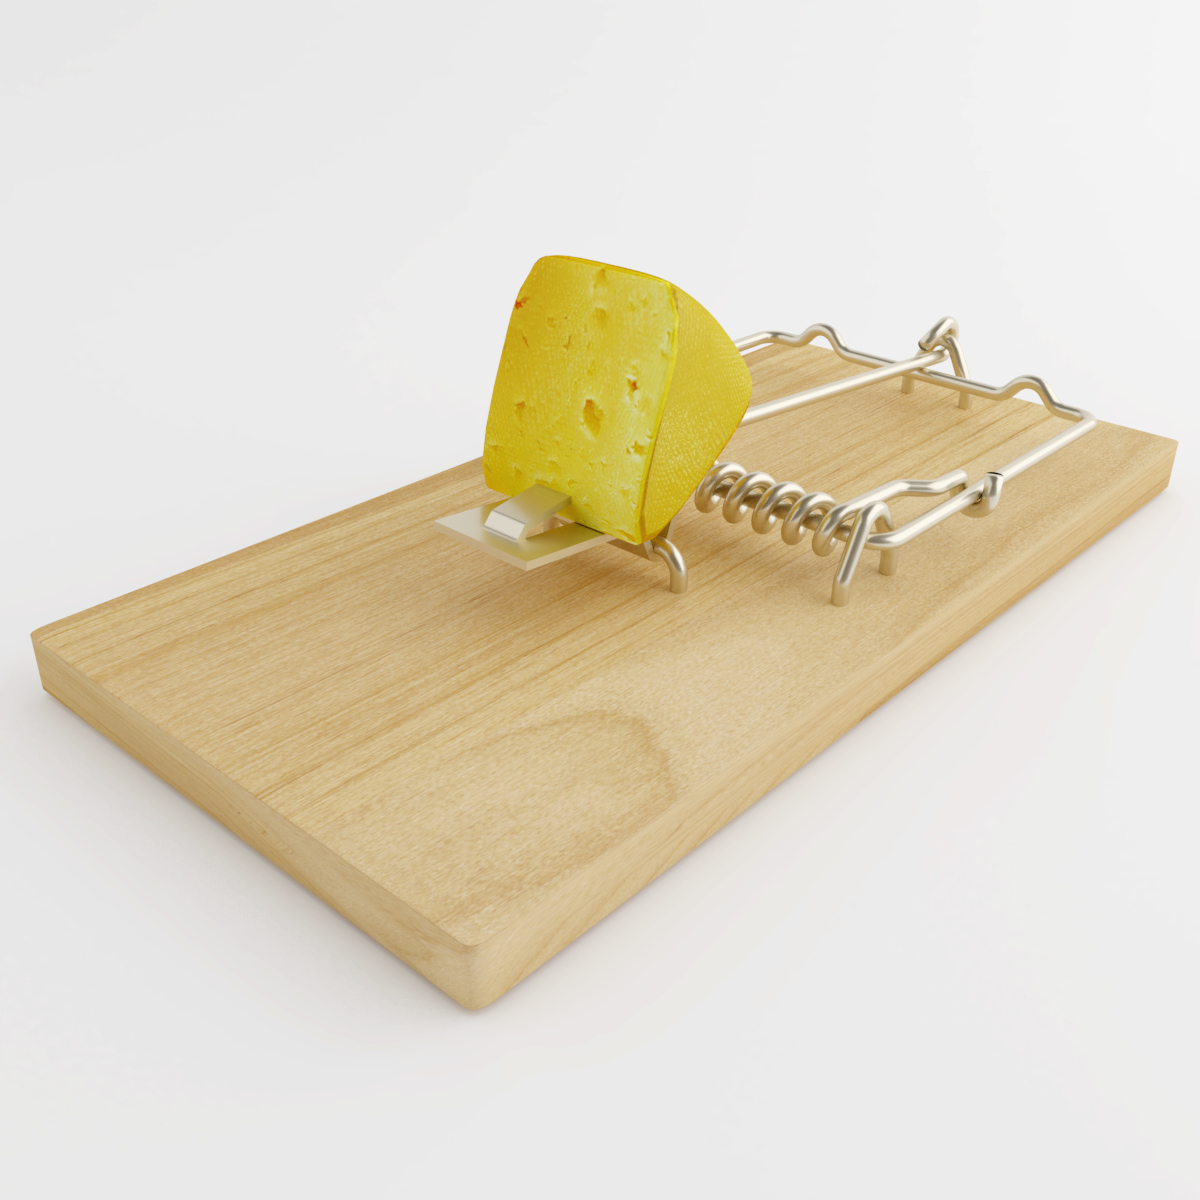 Cheesy Mouse Rat Mousetrap With Cheese Polygon Beater.